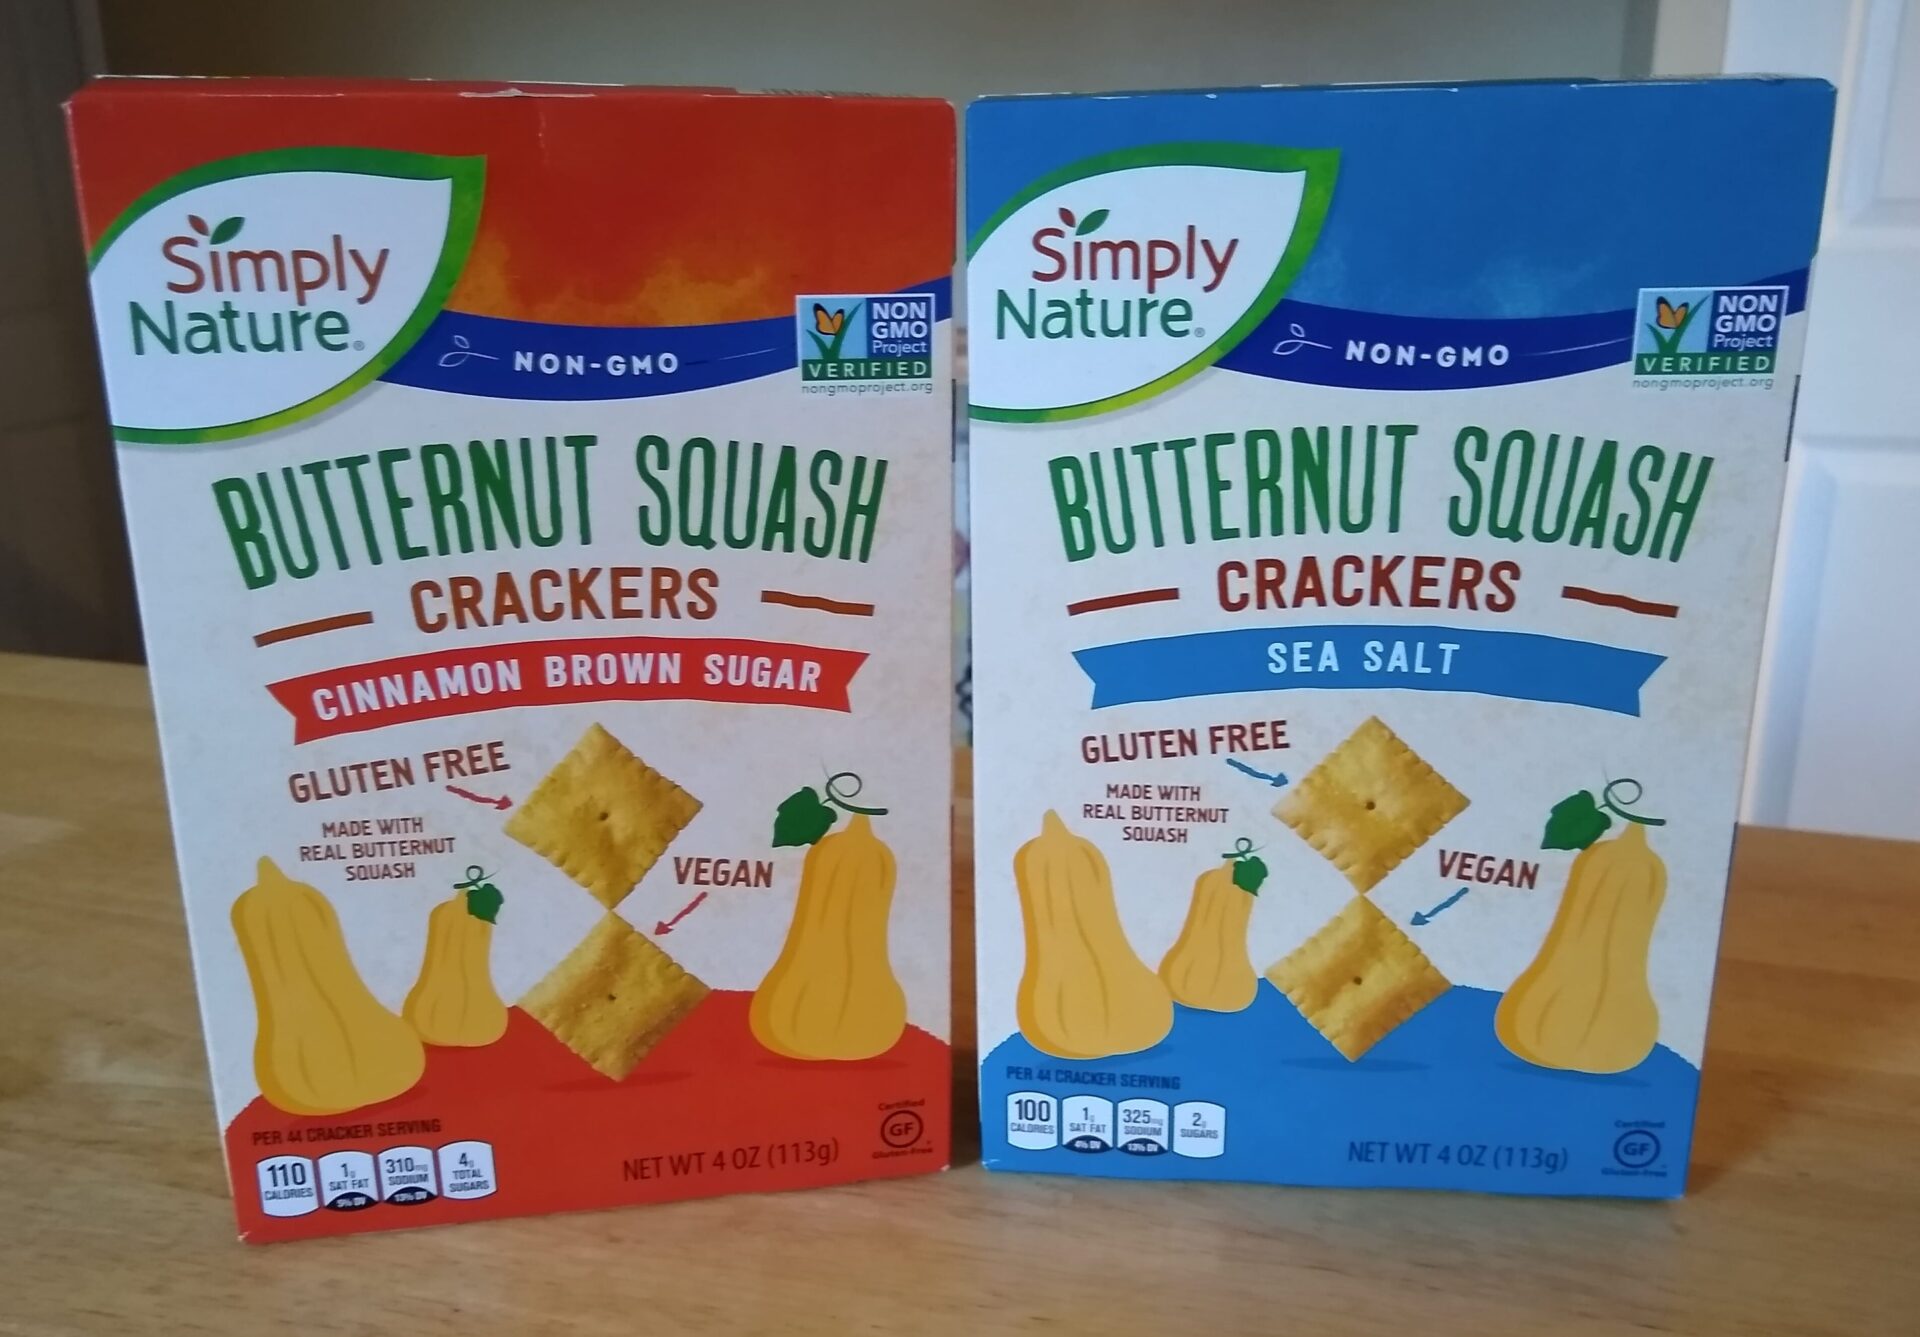 Simply Nature Butternut Squash Crackers